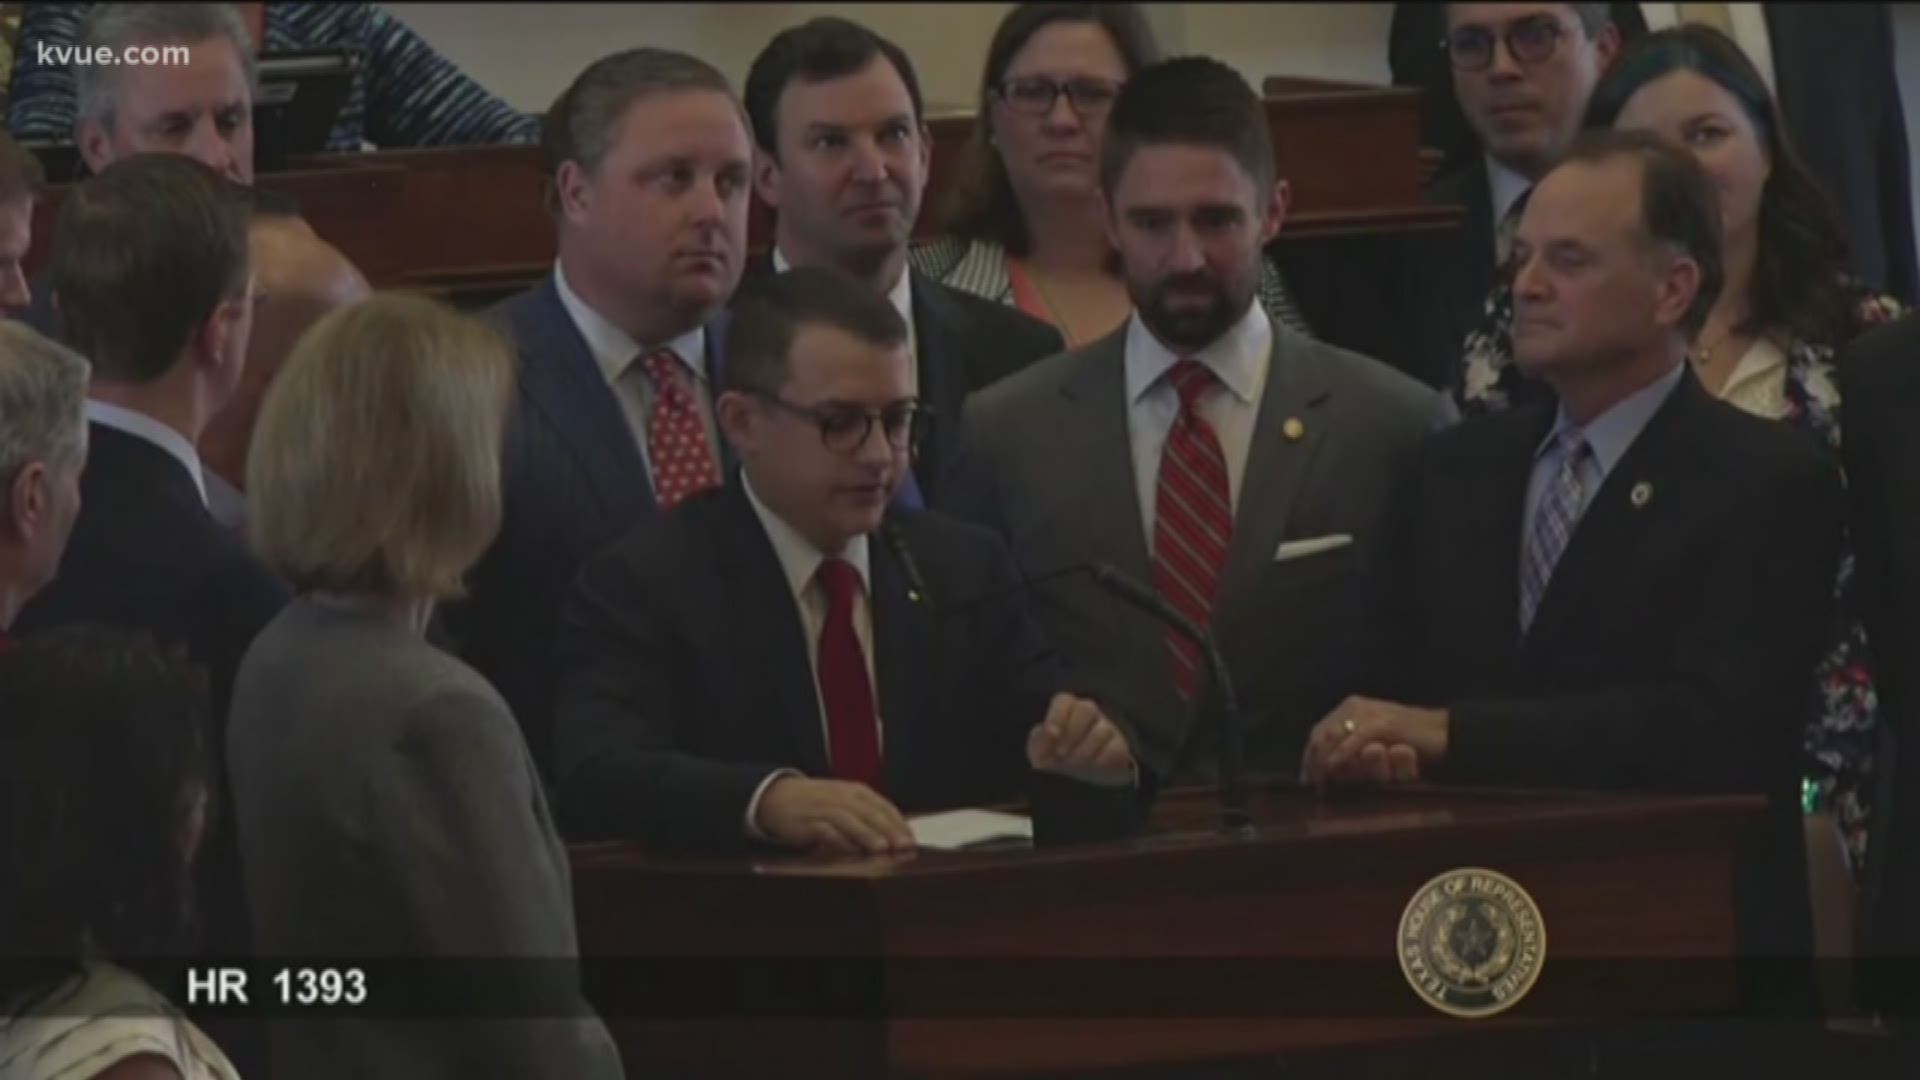 A Texas lawmaker opened up Thursday about his personal journey with autism.